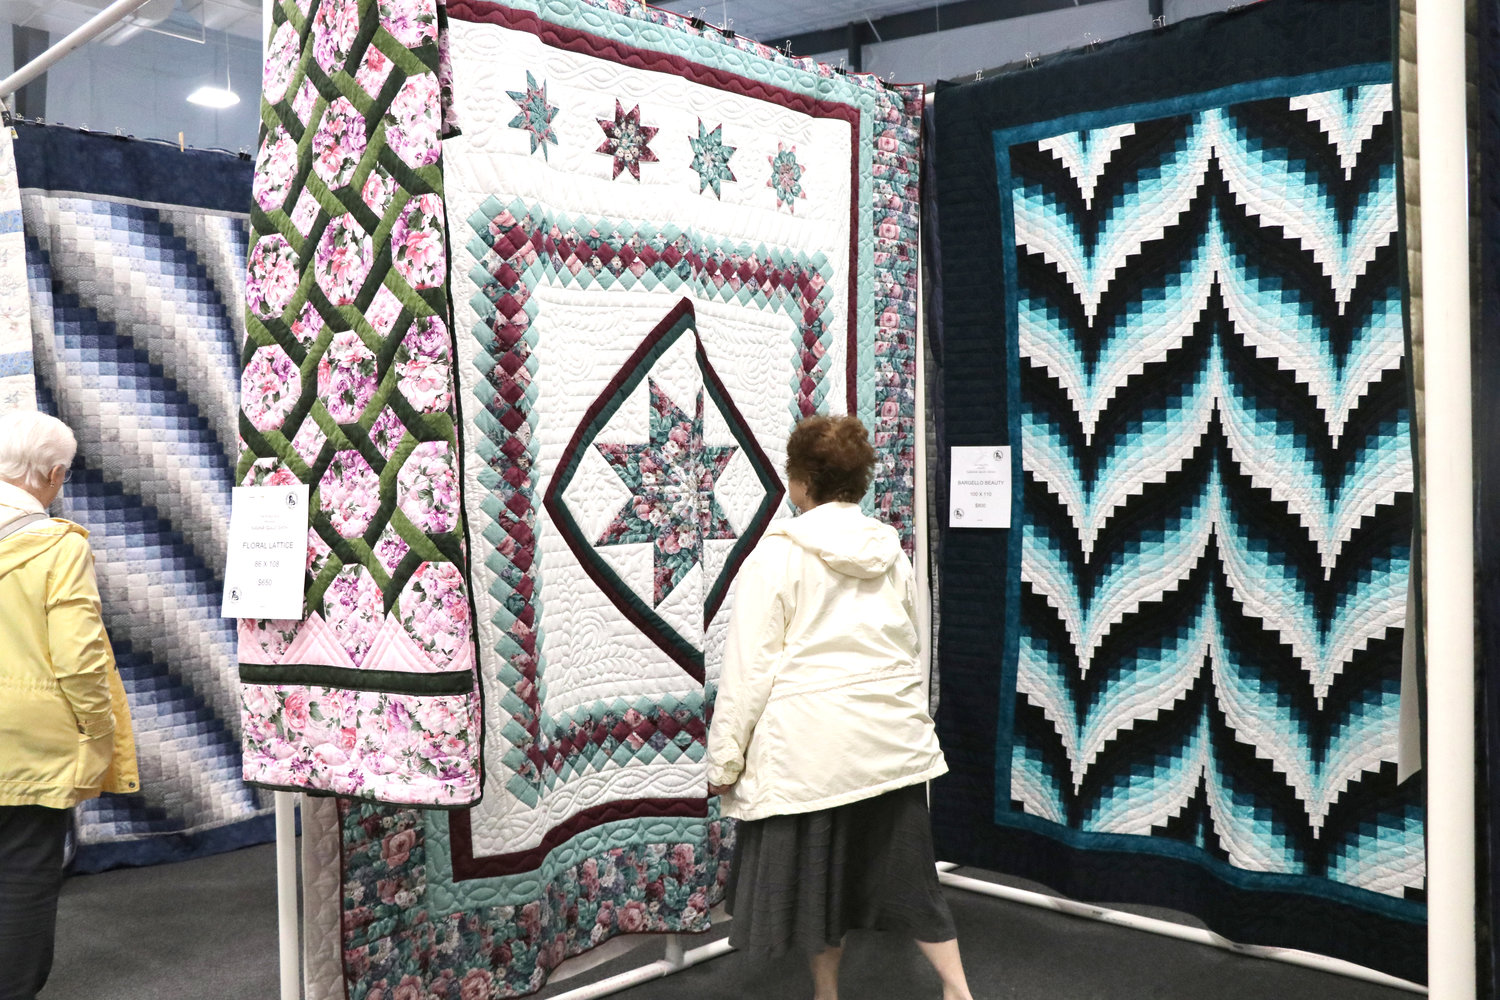 Visitors saw a huge variety of quilts and techniques on display.